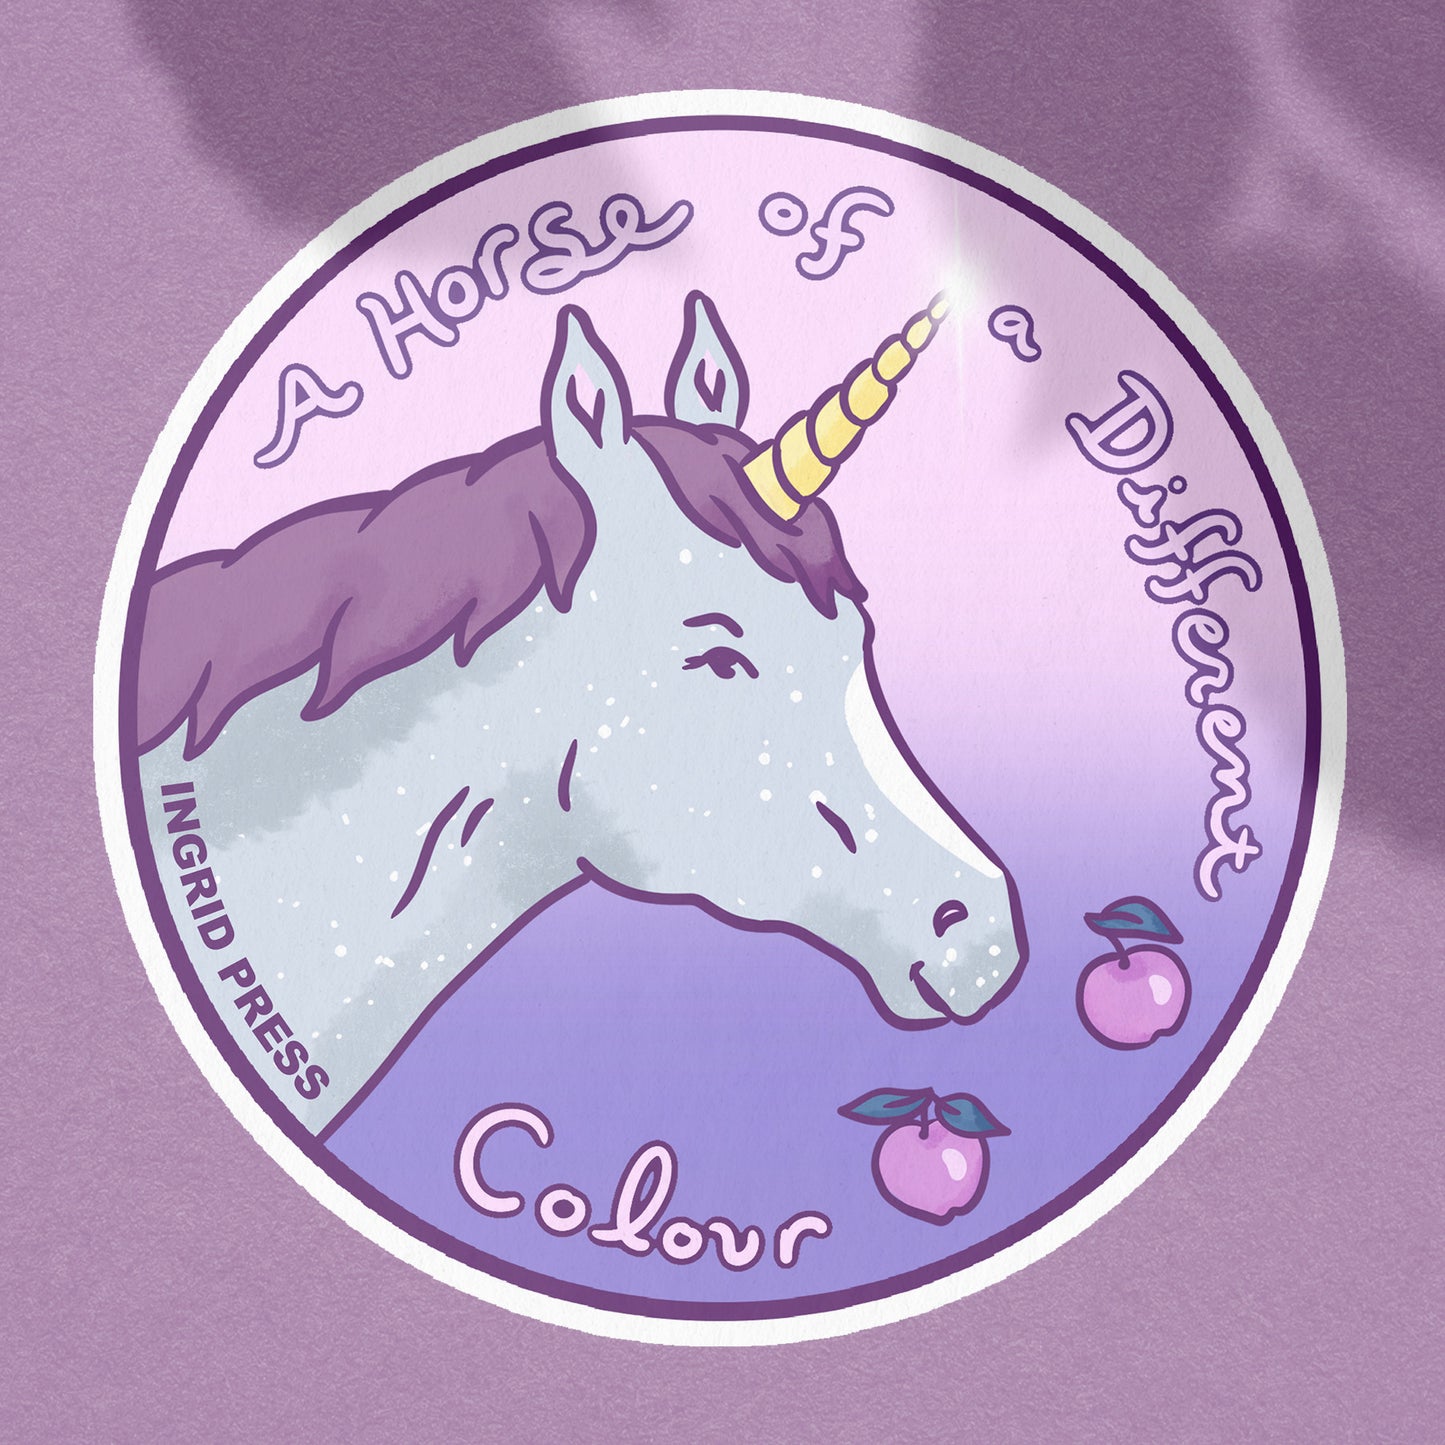 Horse of a Different Colour Die-Cut Sticker